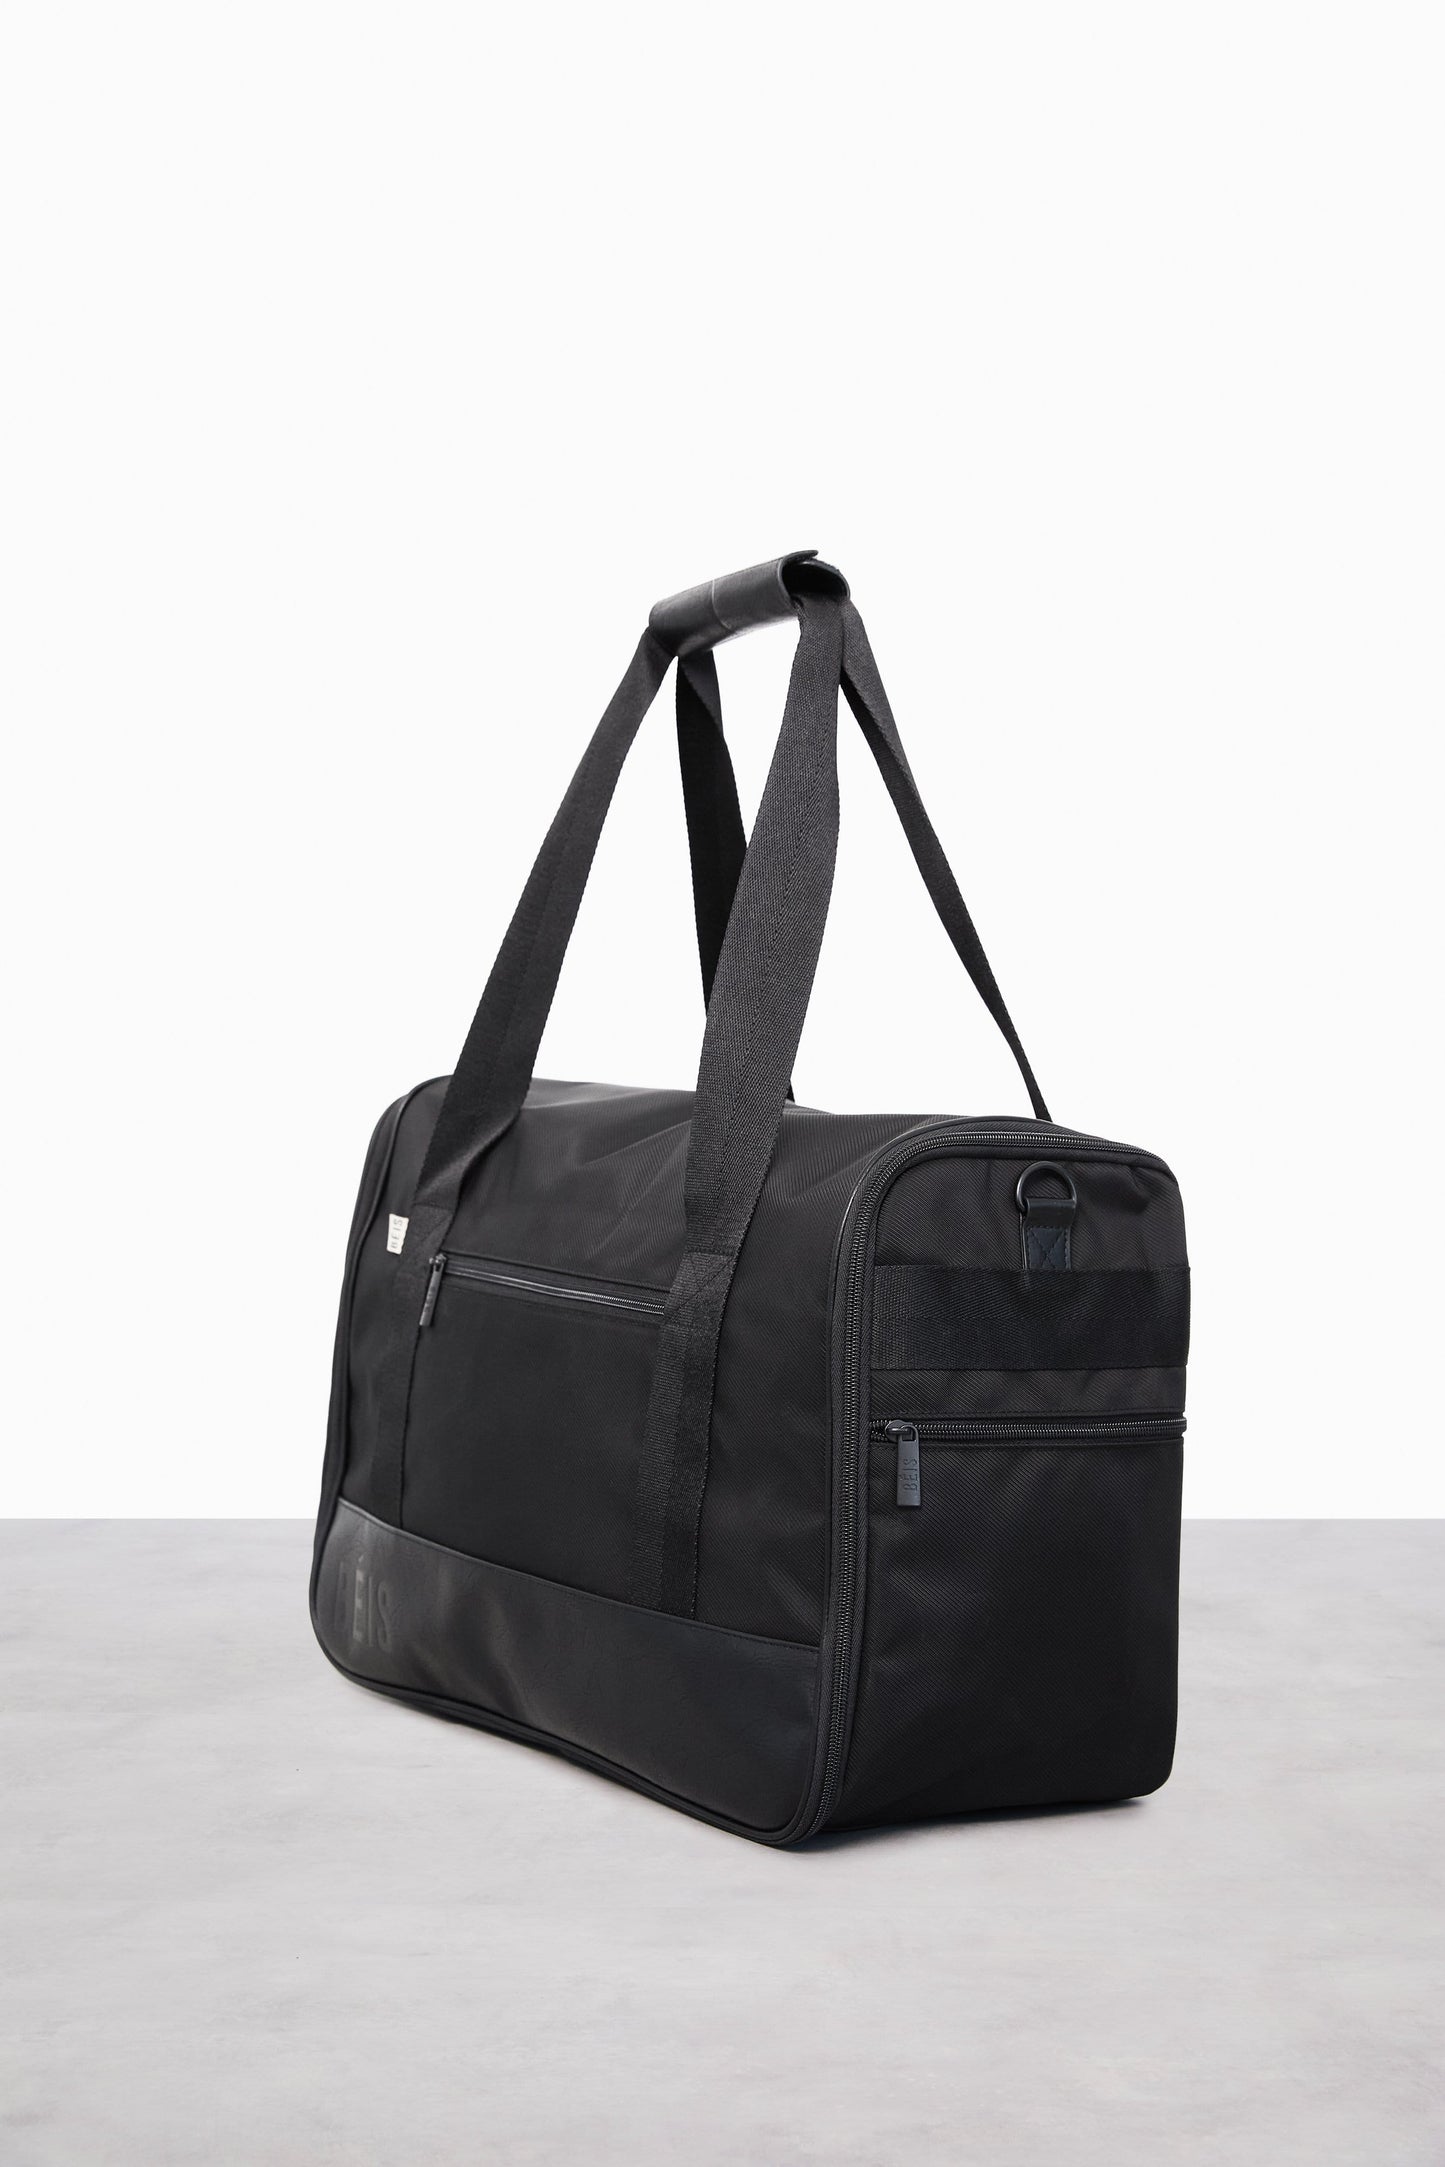 Hanging Duffle Black Side View